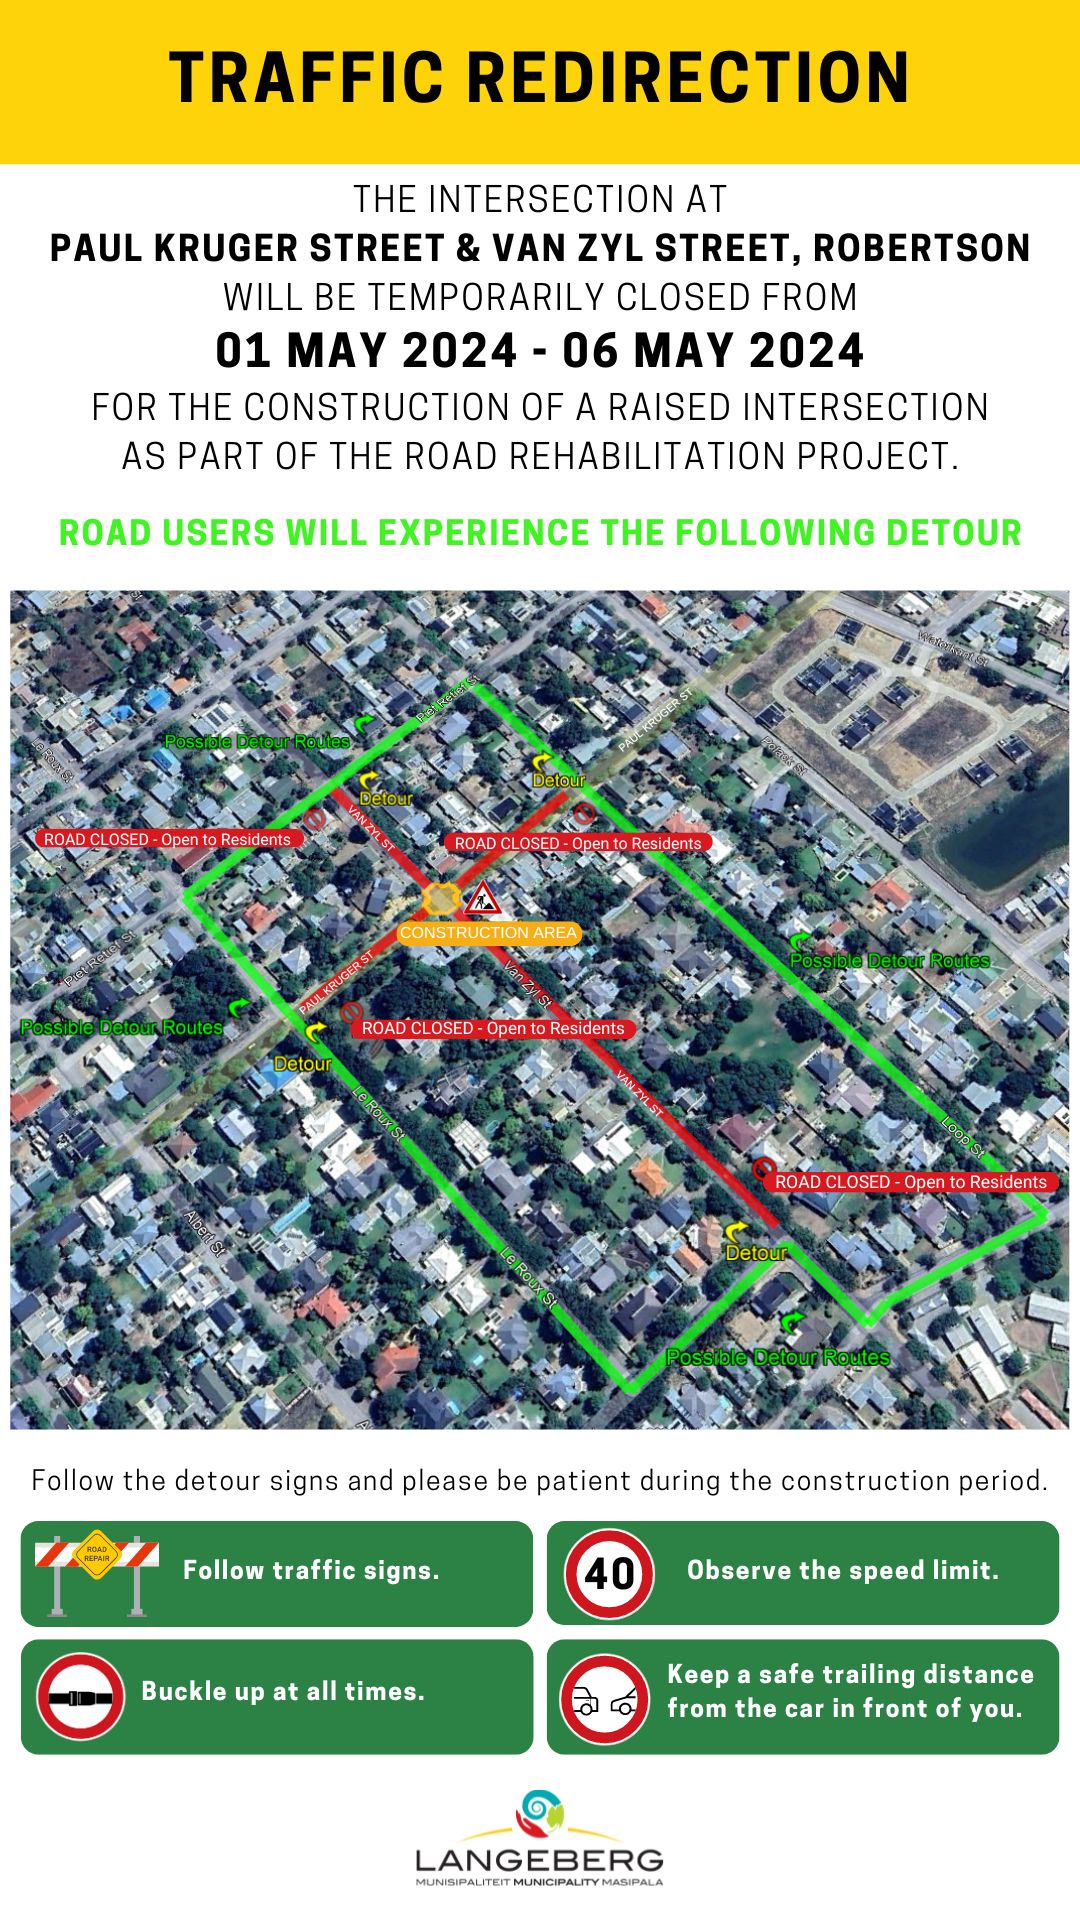 TRAFFIC REDIRECTION PLANNED ROBERTSON MAY 2024